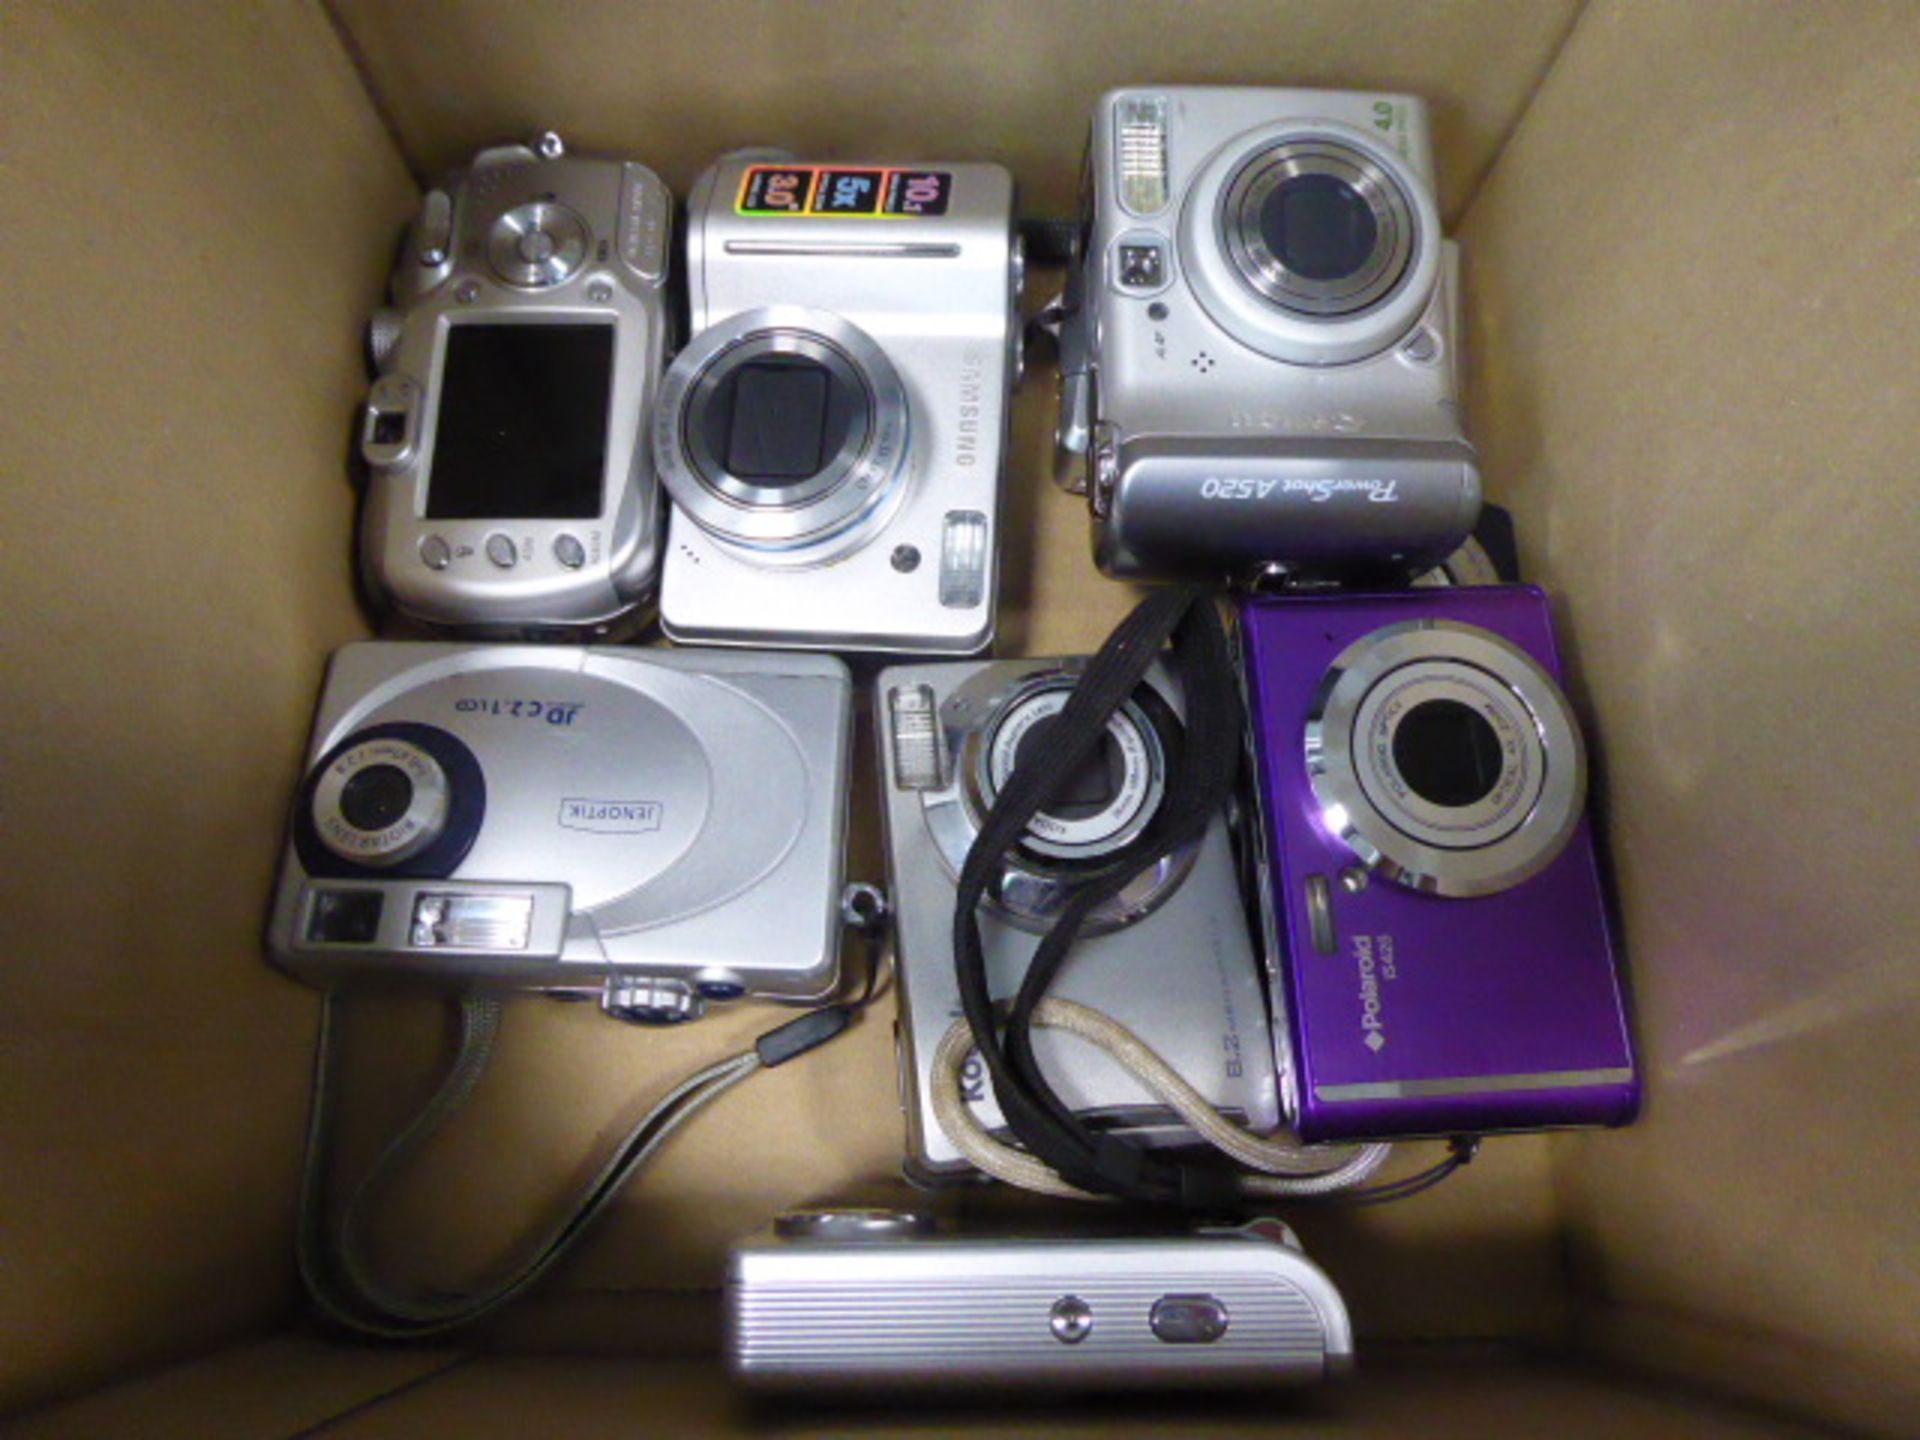 Box comprising approximately 9 digital cameras as found